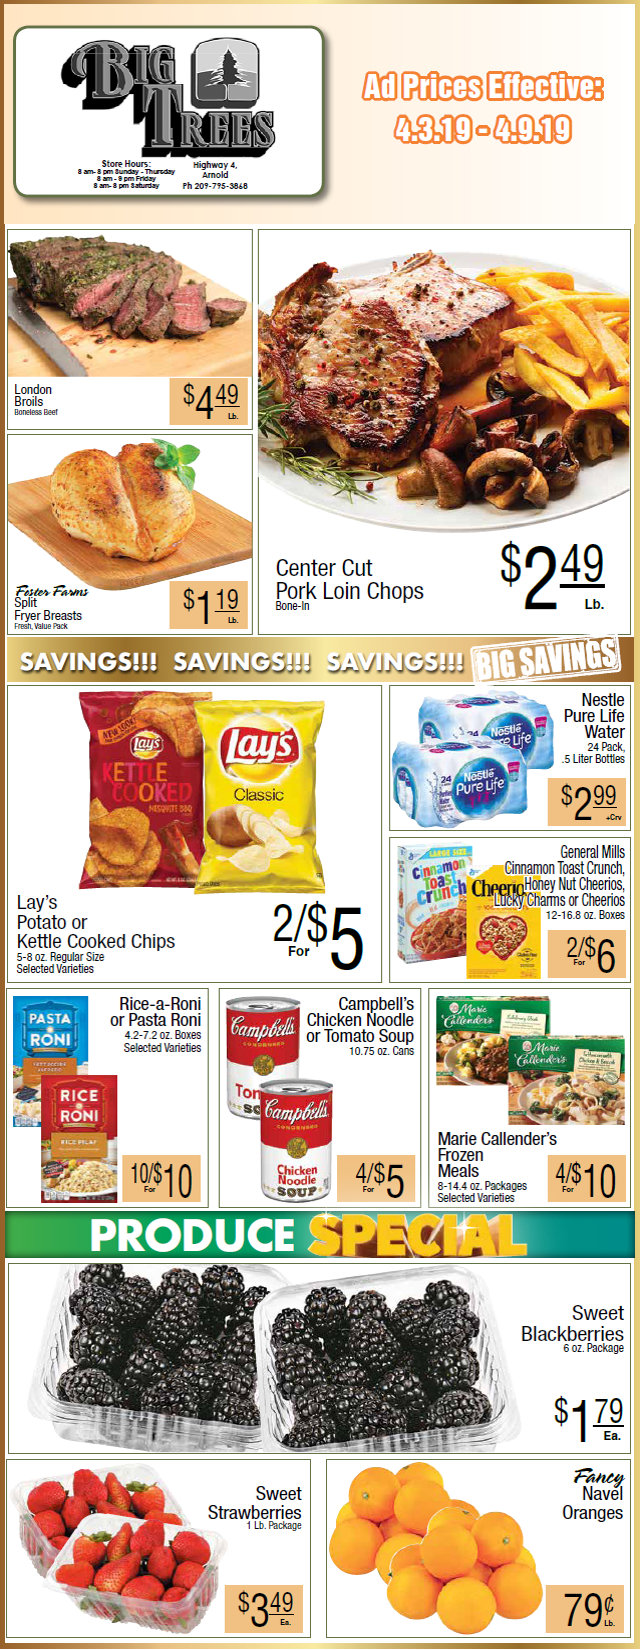 Big Trees Market Weekly Ad & Grocery Specials Through April 9th